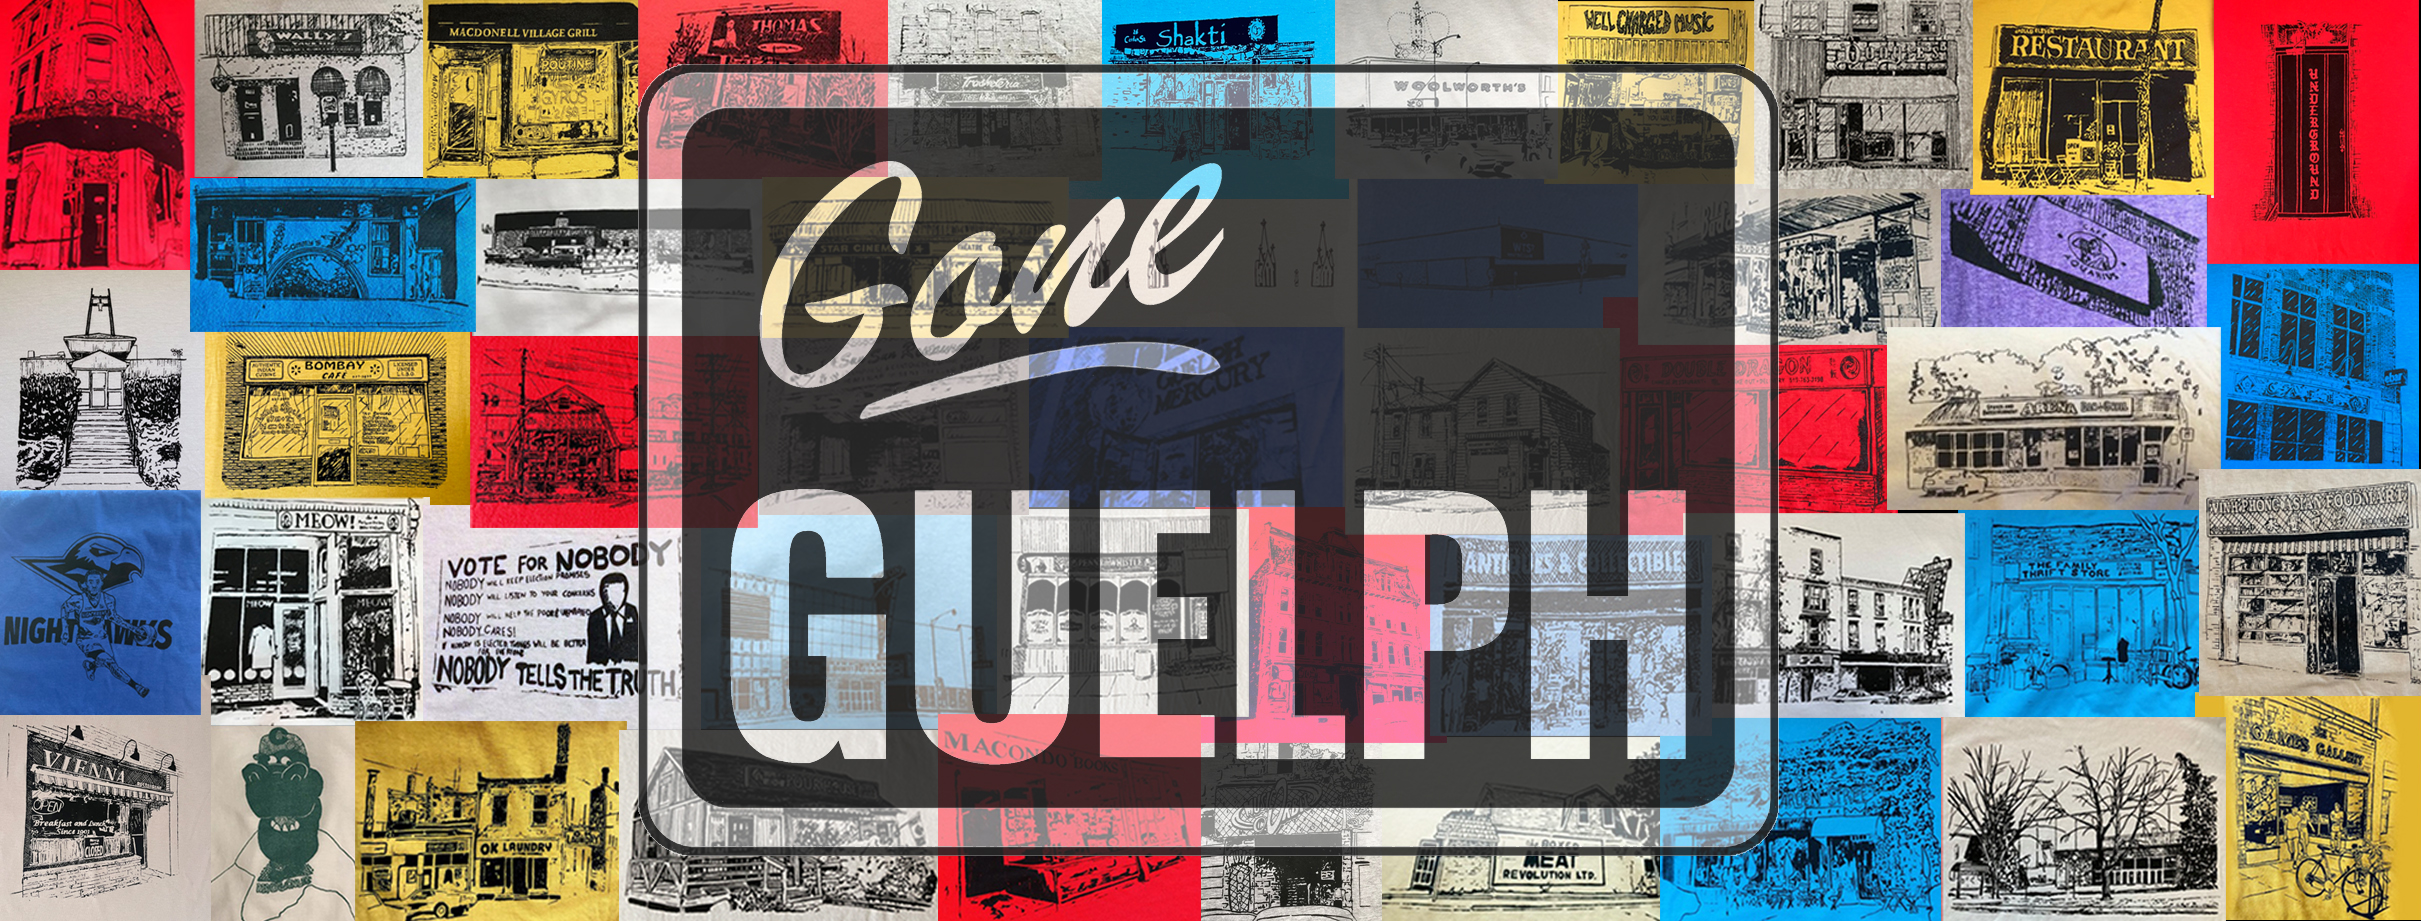 47 designs wigh Gone guelph sign